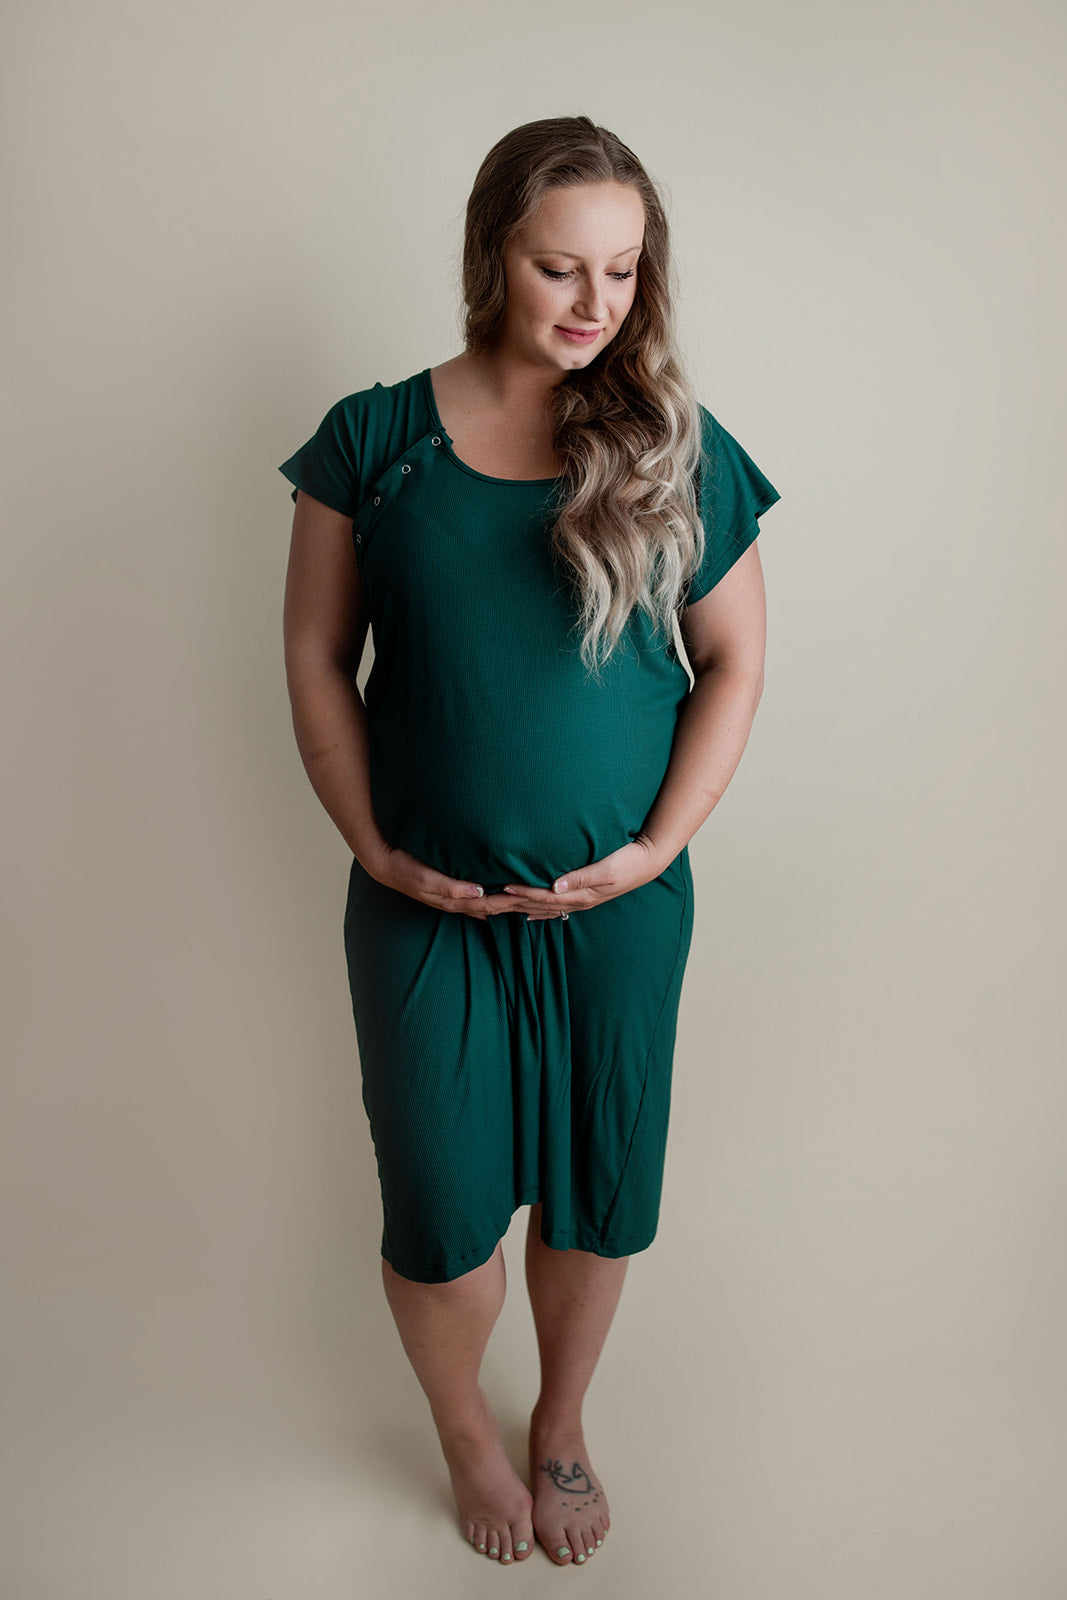 Ribbed Forest Green Labor and Delivery/ Nursing Gown